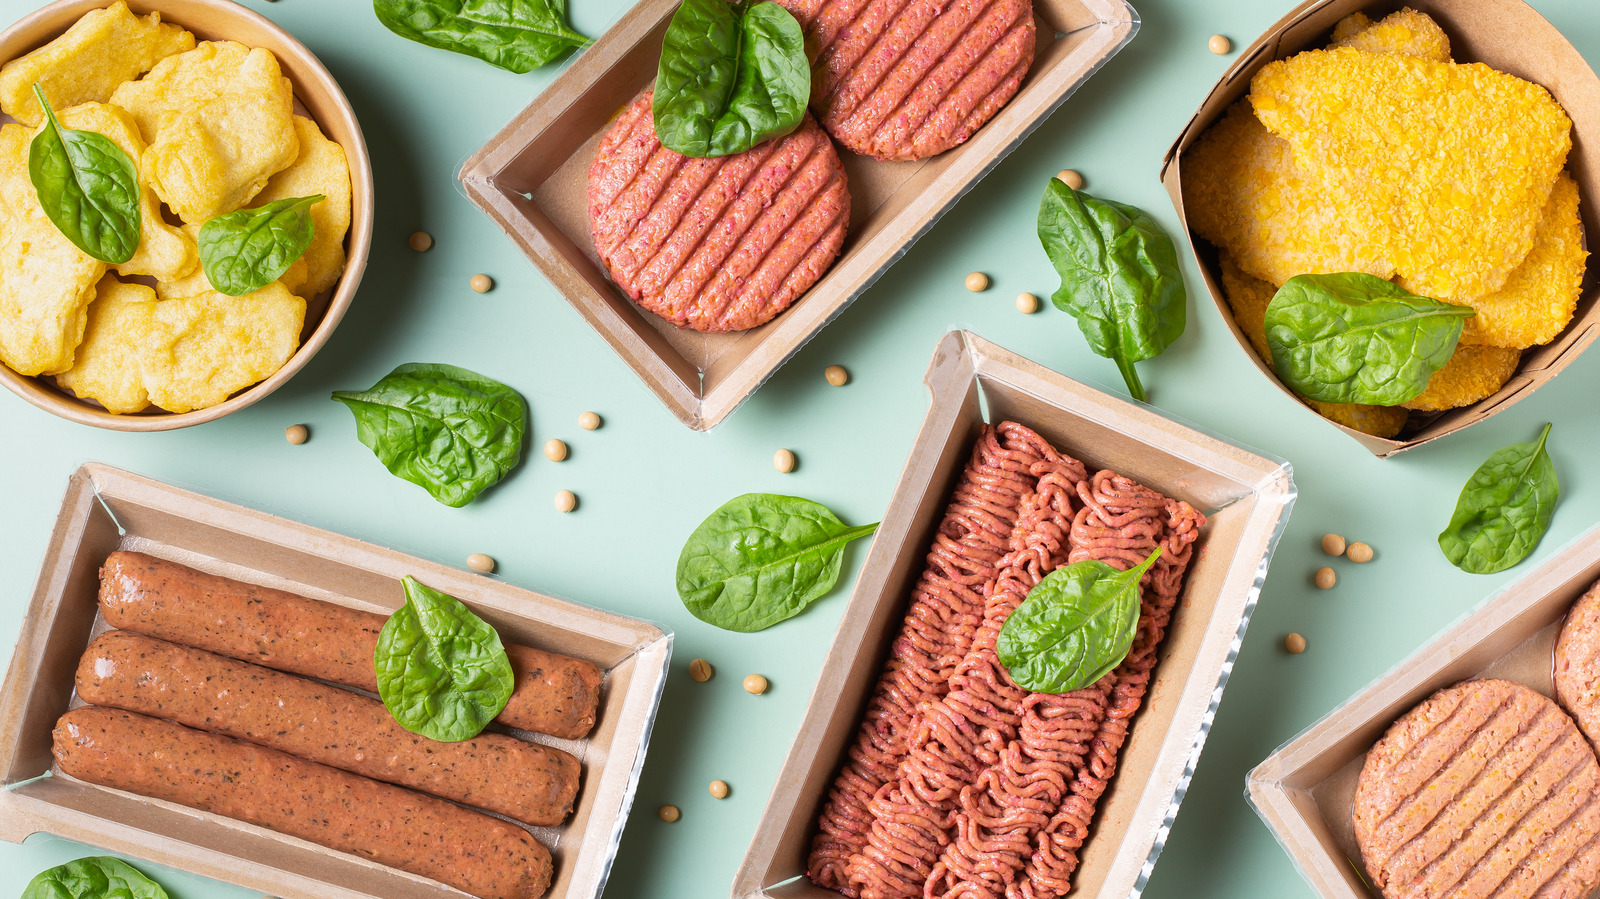 https://www.tastingtable.com/img/gallery/20-plant-based-meat-brands-every-vegetarian-should-know-about/l-intro-1651172550.jpg